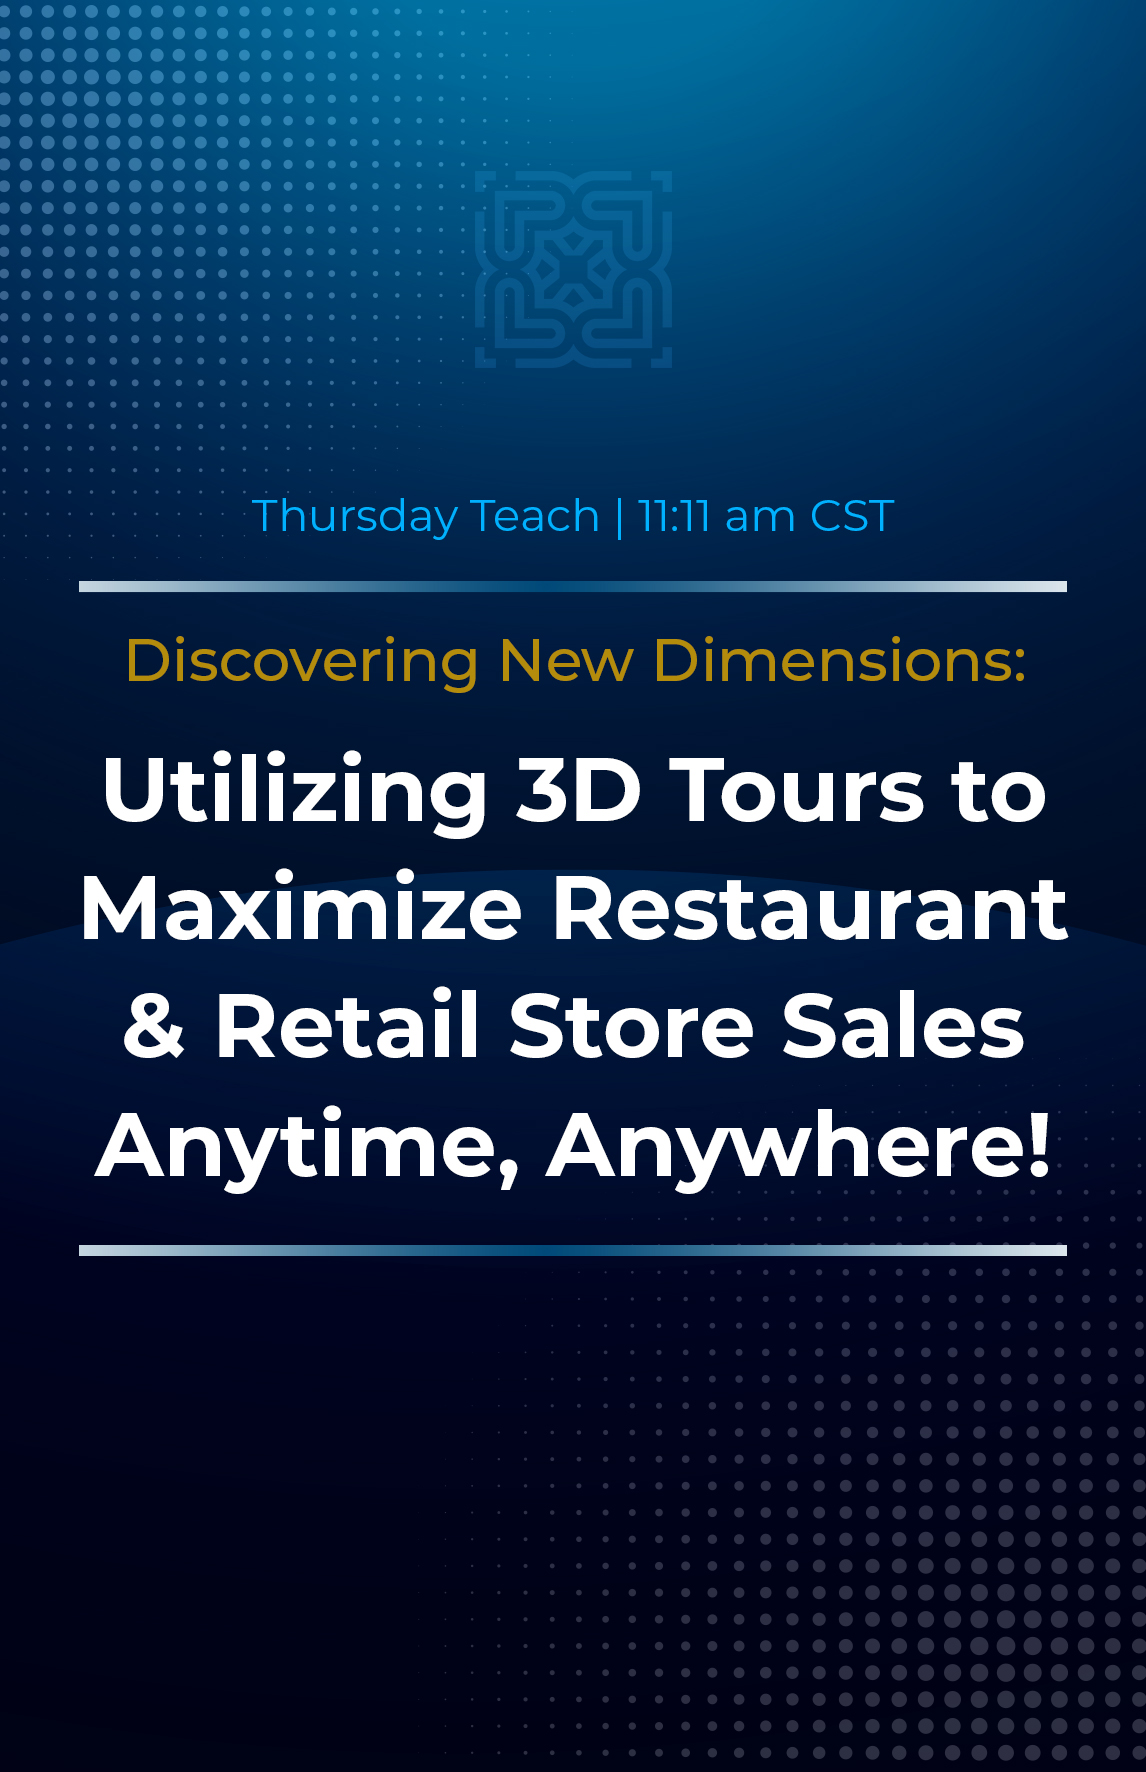 Utilizing 3D Tours to Maximize Restaurant and Retail Store Sales Anytime Anywhere